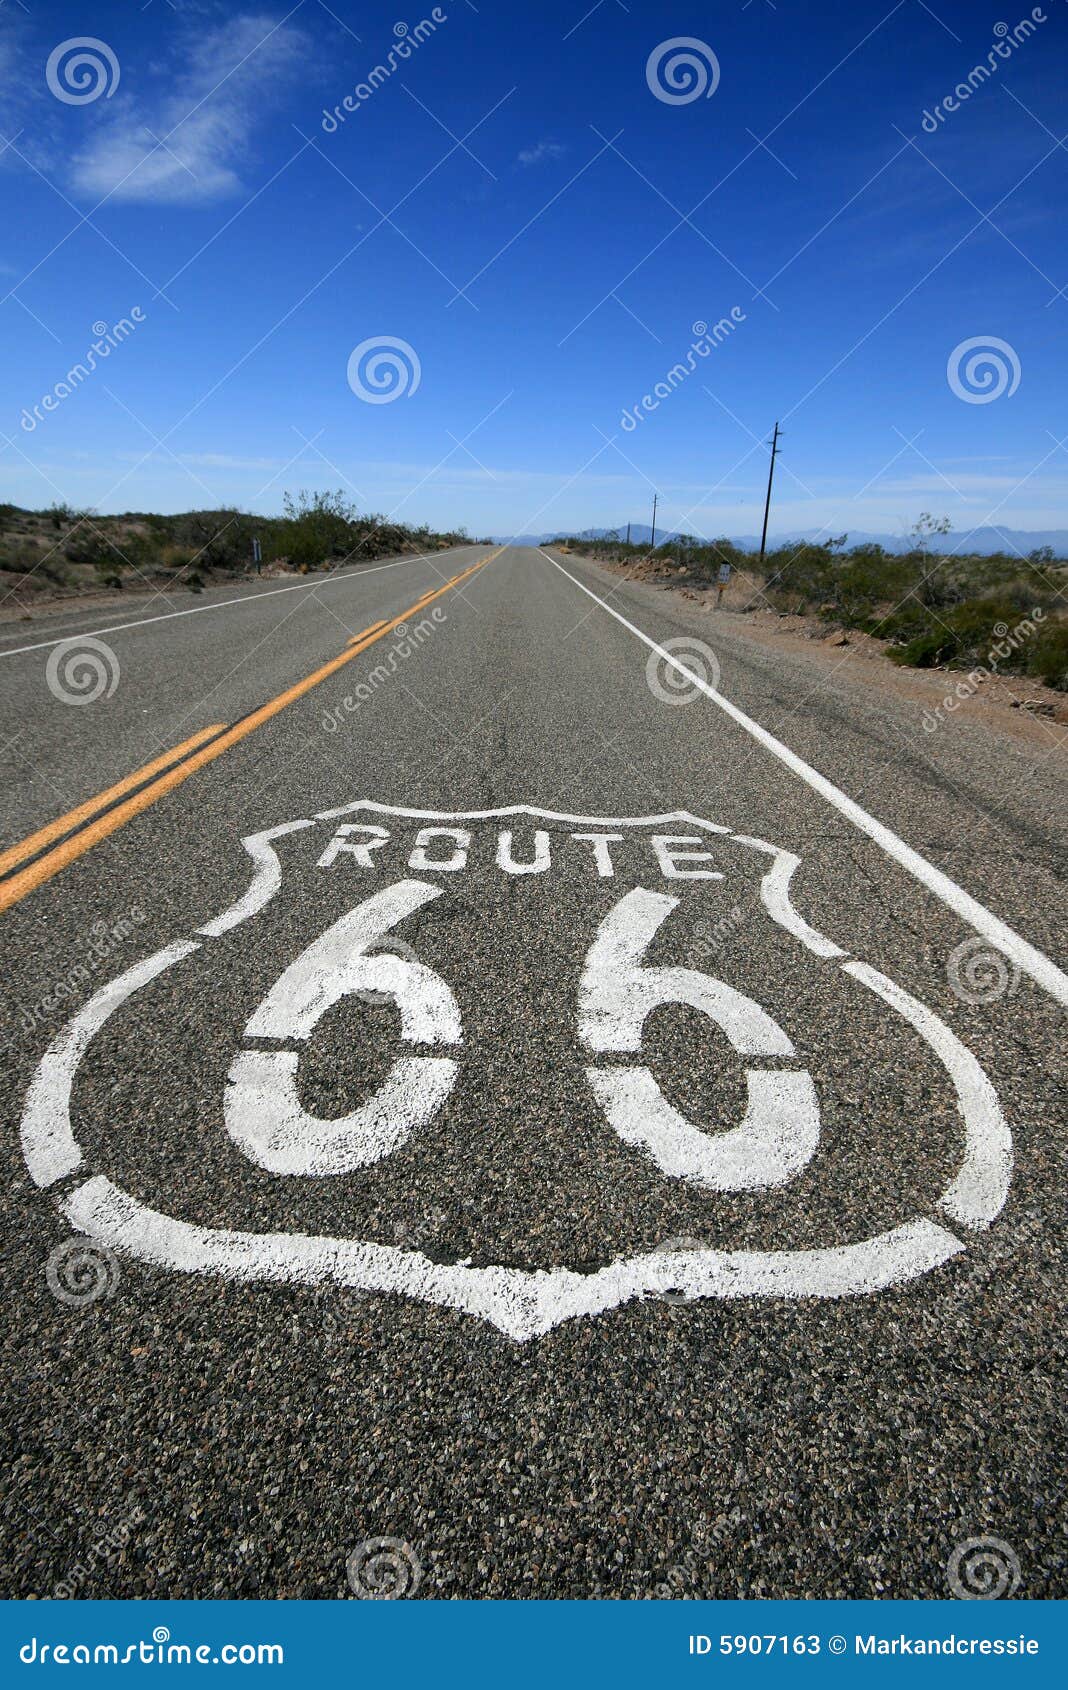 route 66 road marking, california